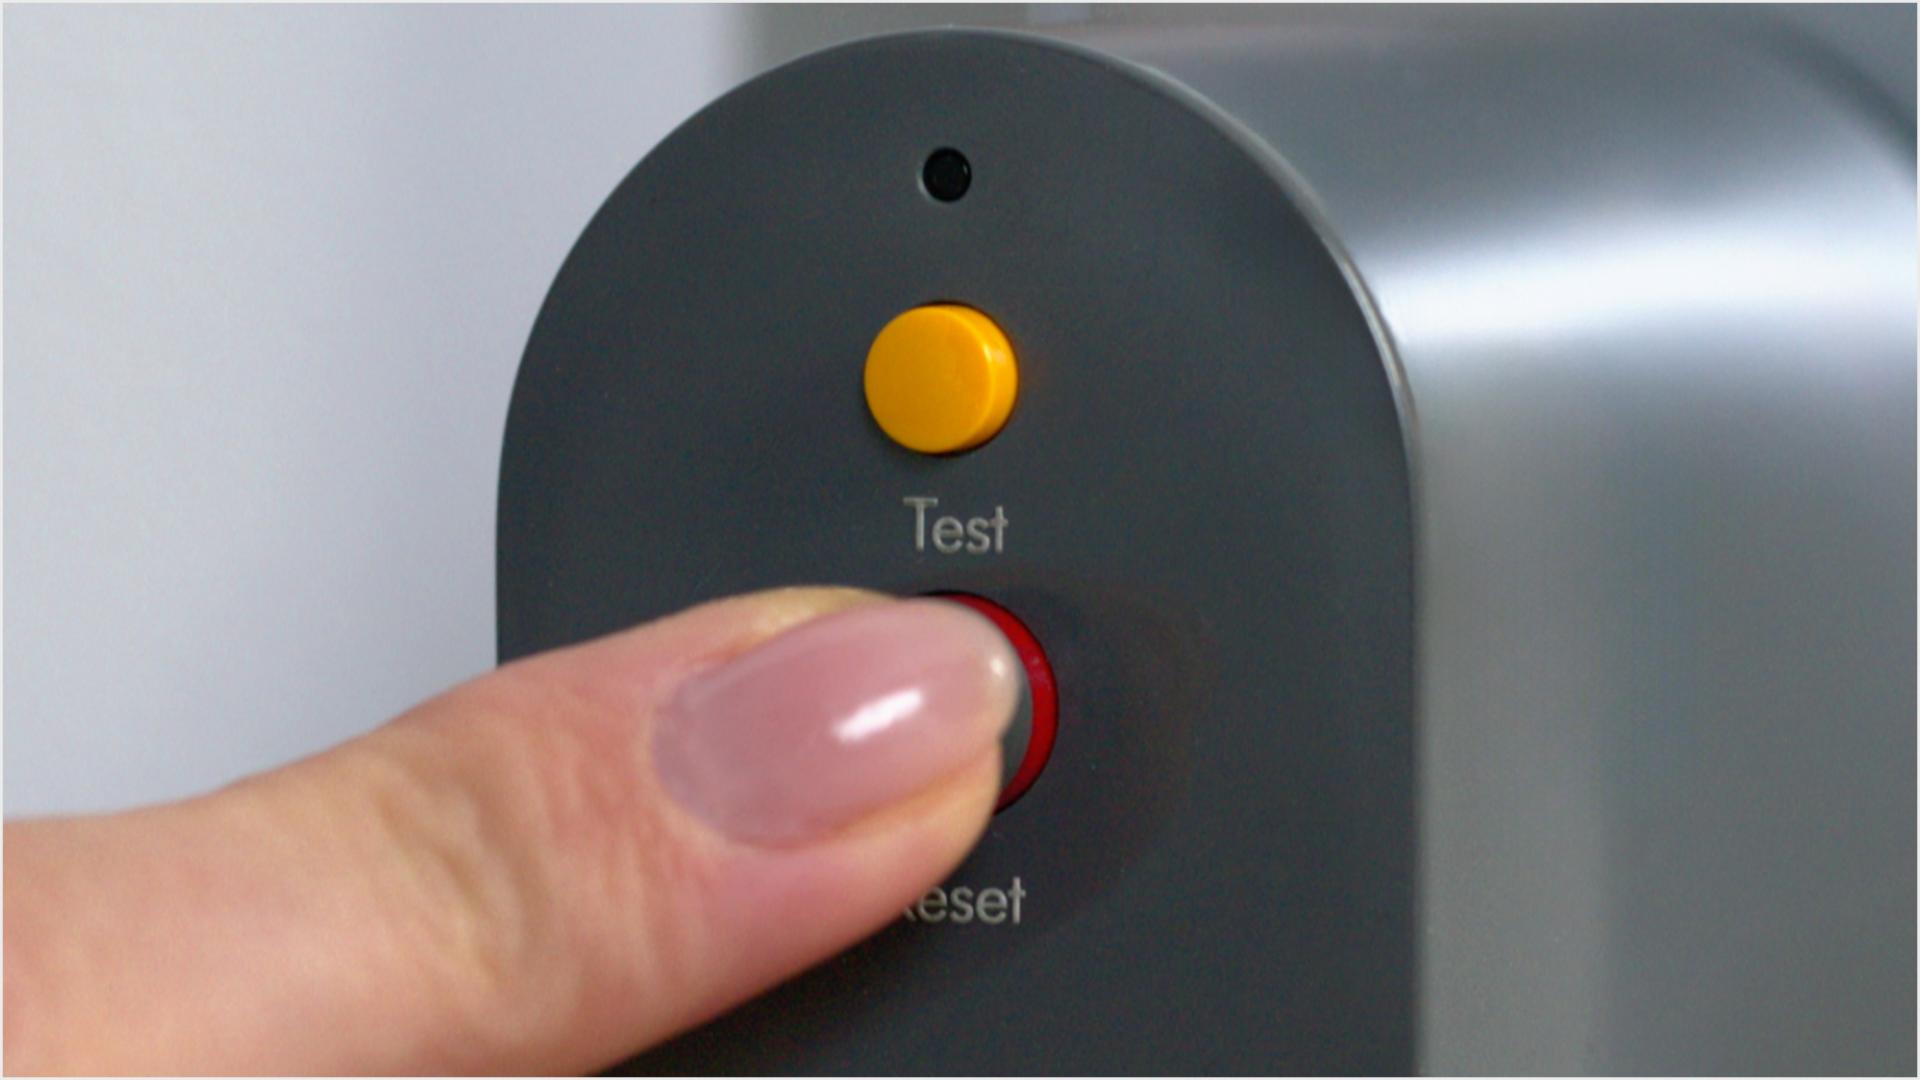 A finger is shown pressing the reset button on the PRCD plug